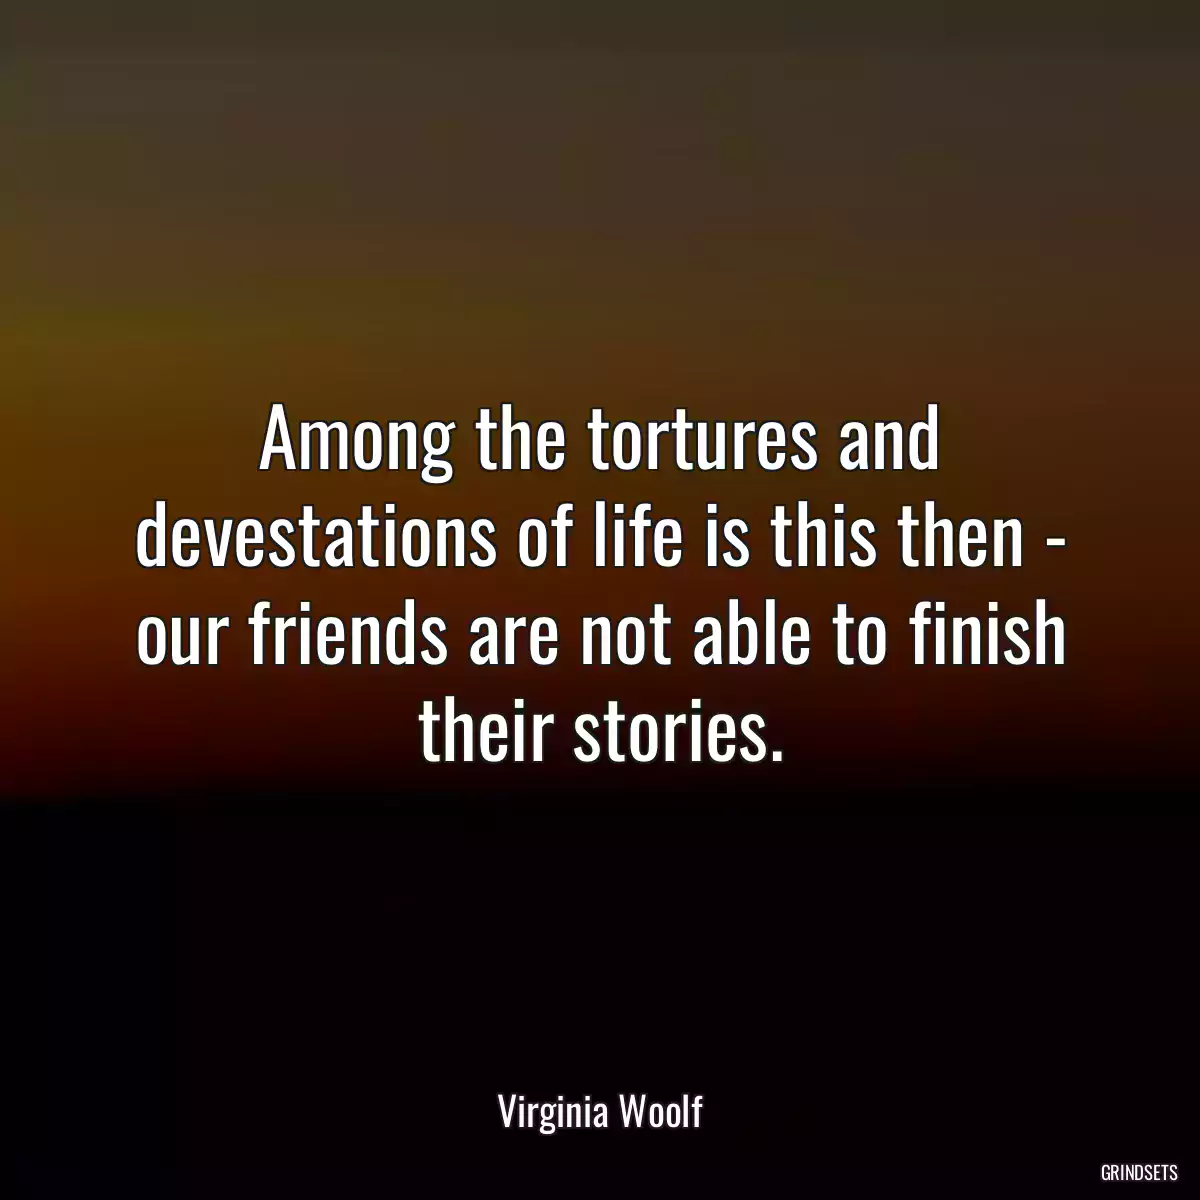 Among the tortures and devestations of life is this then - our friends are not able to finish their stories.